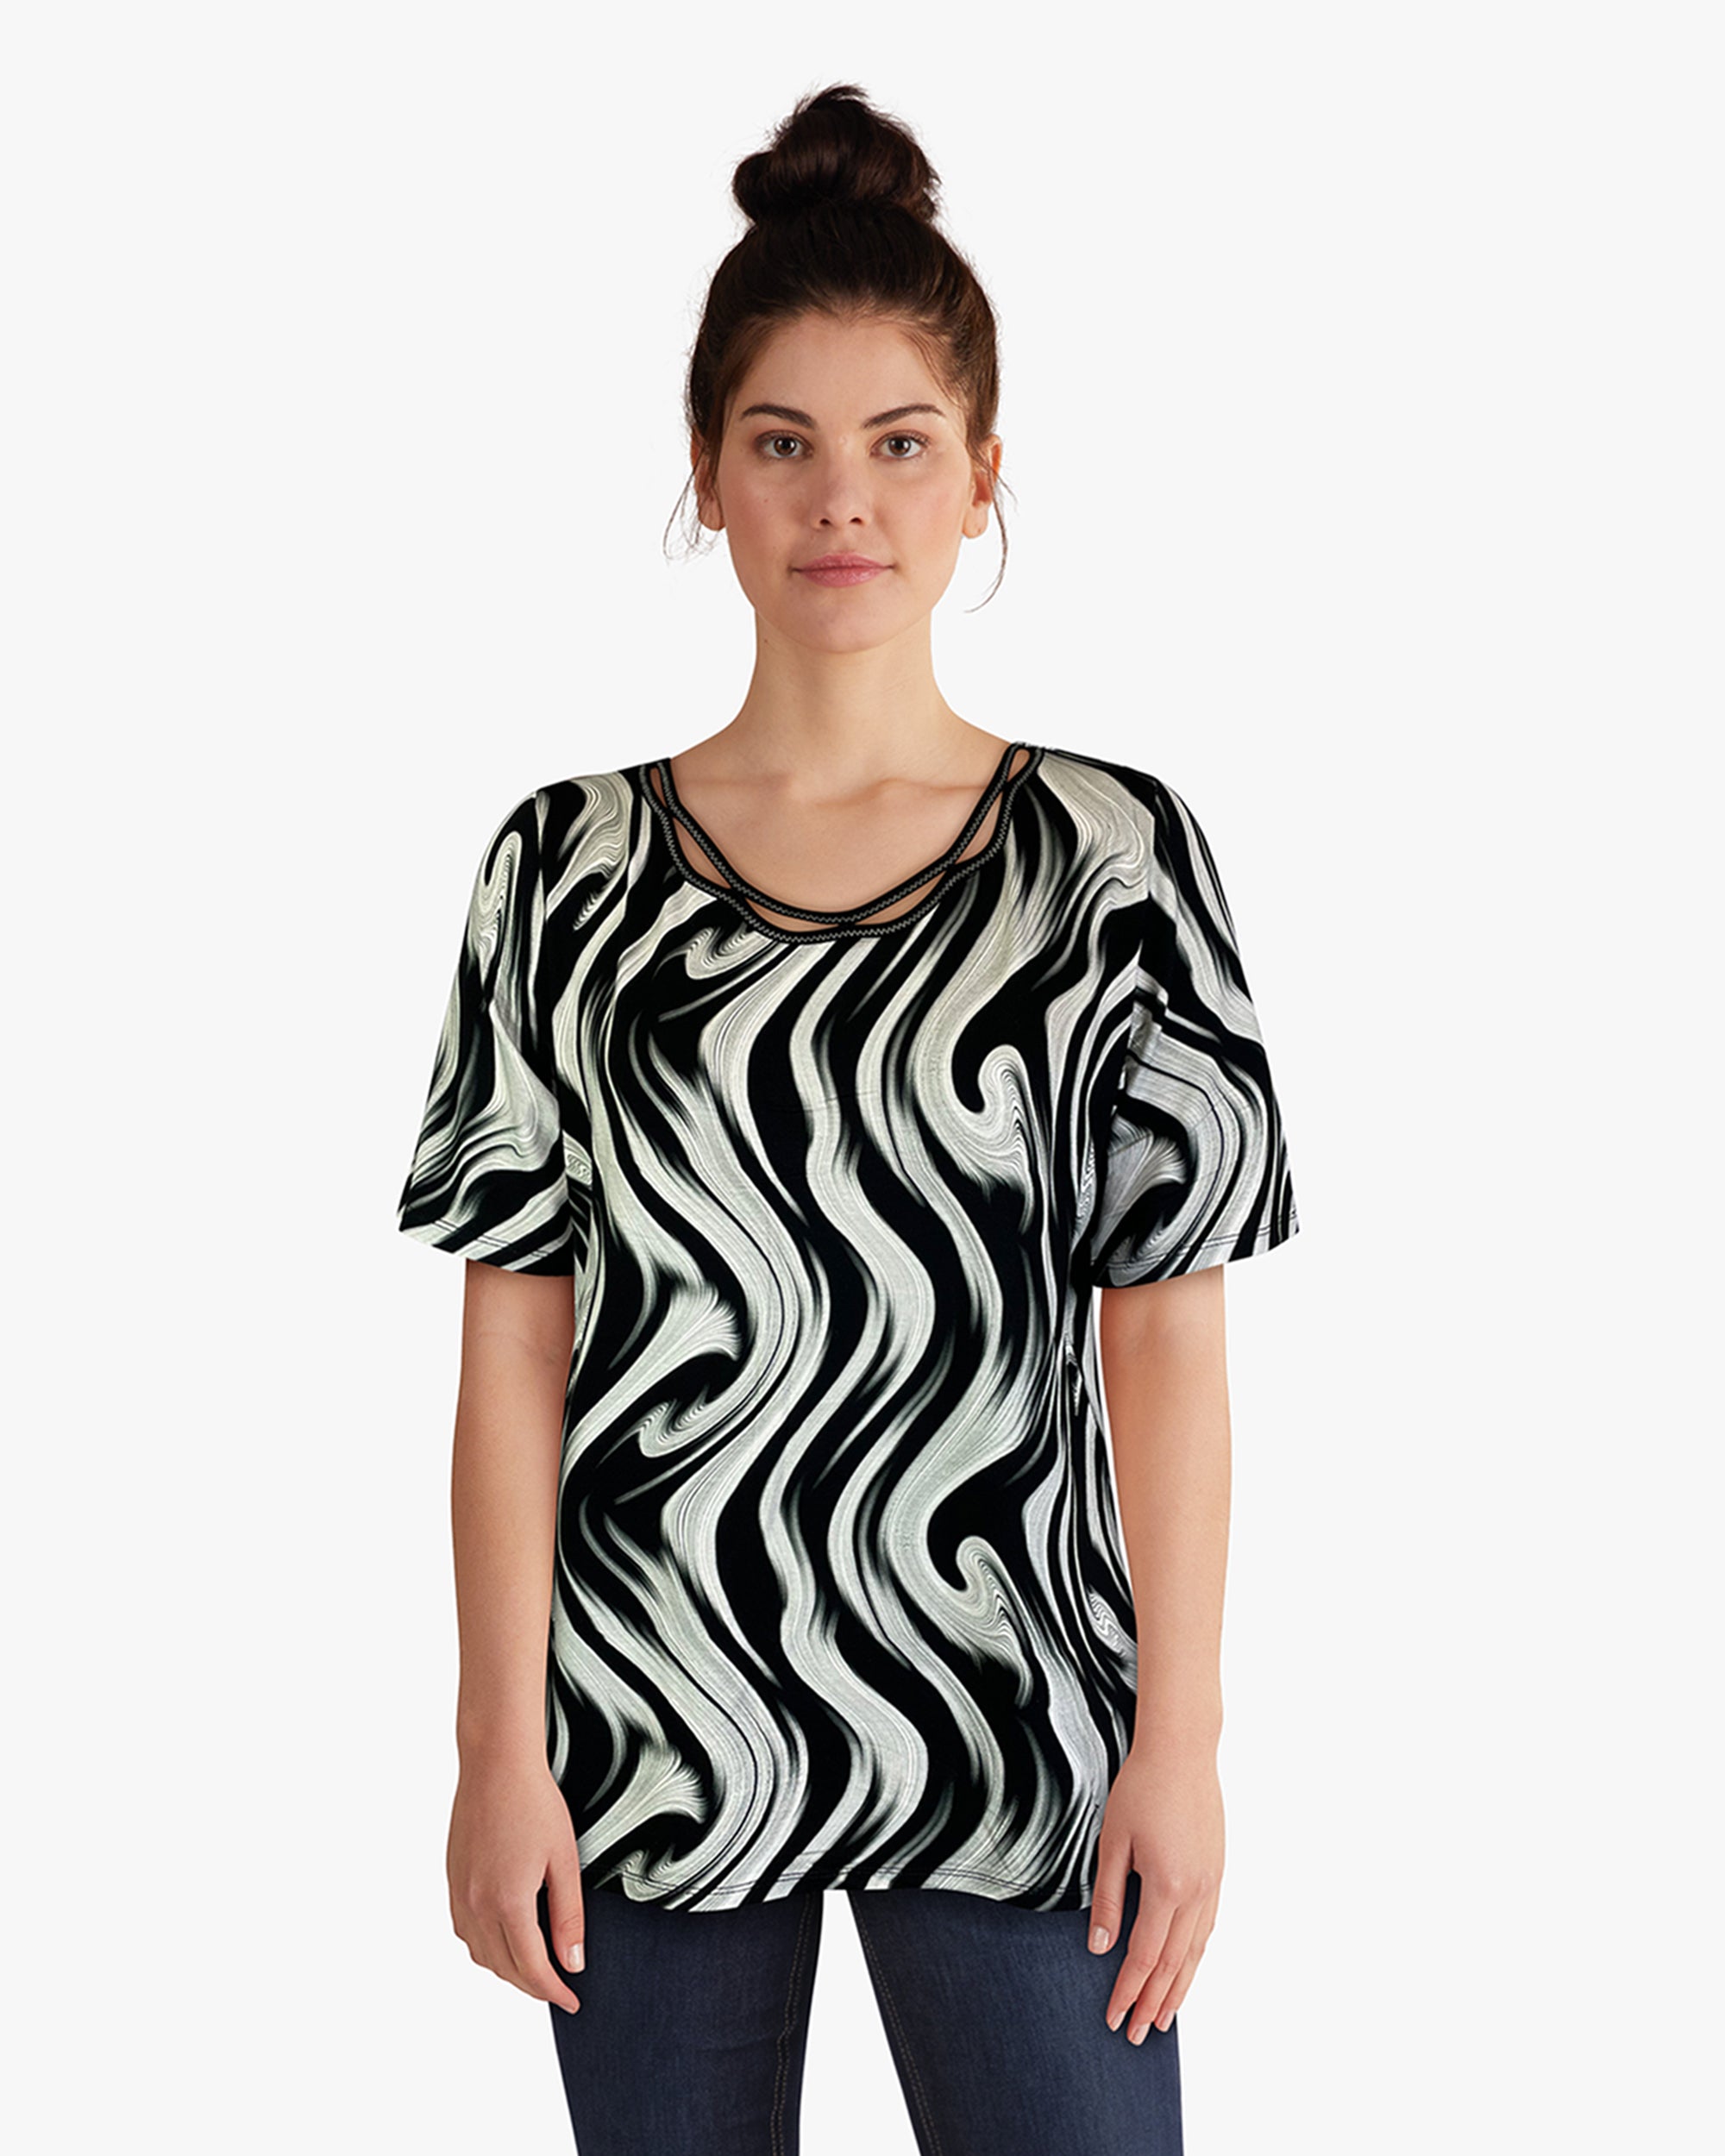 Knit Printed Top with Neck stitching detail (D27749) Black Swirl